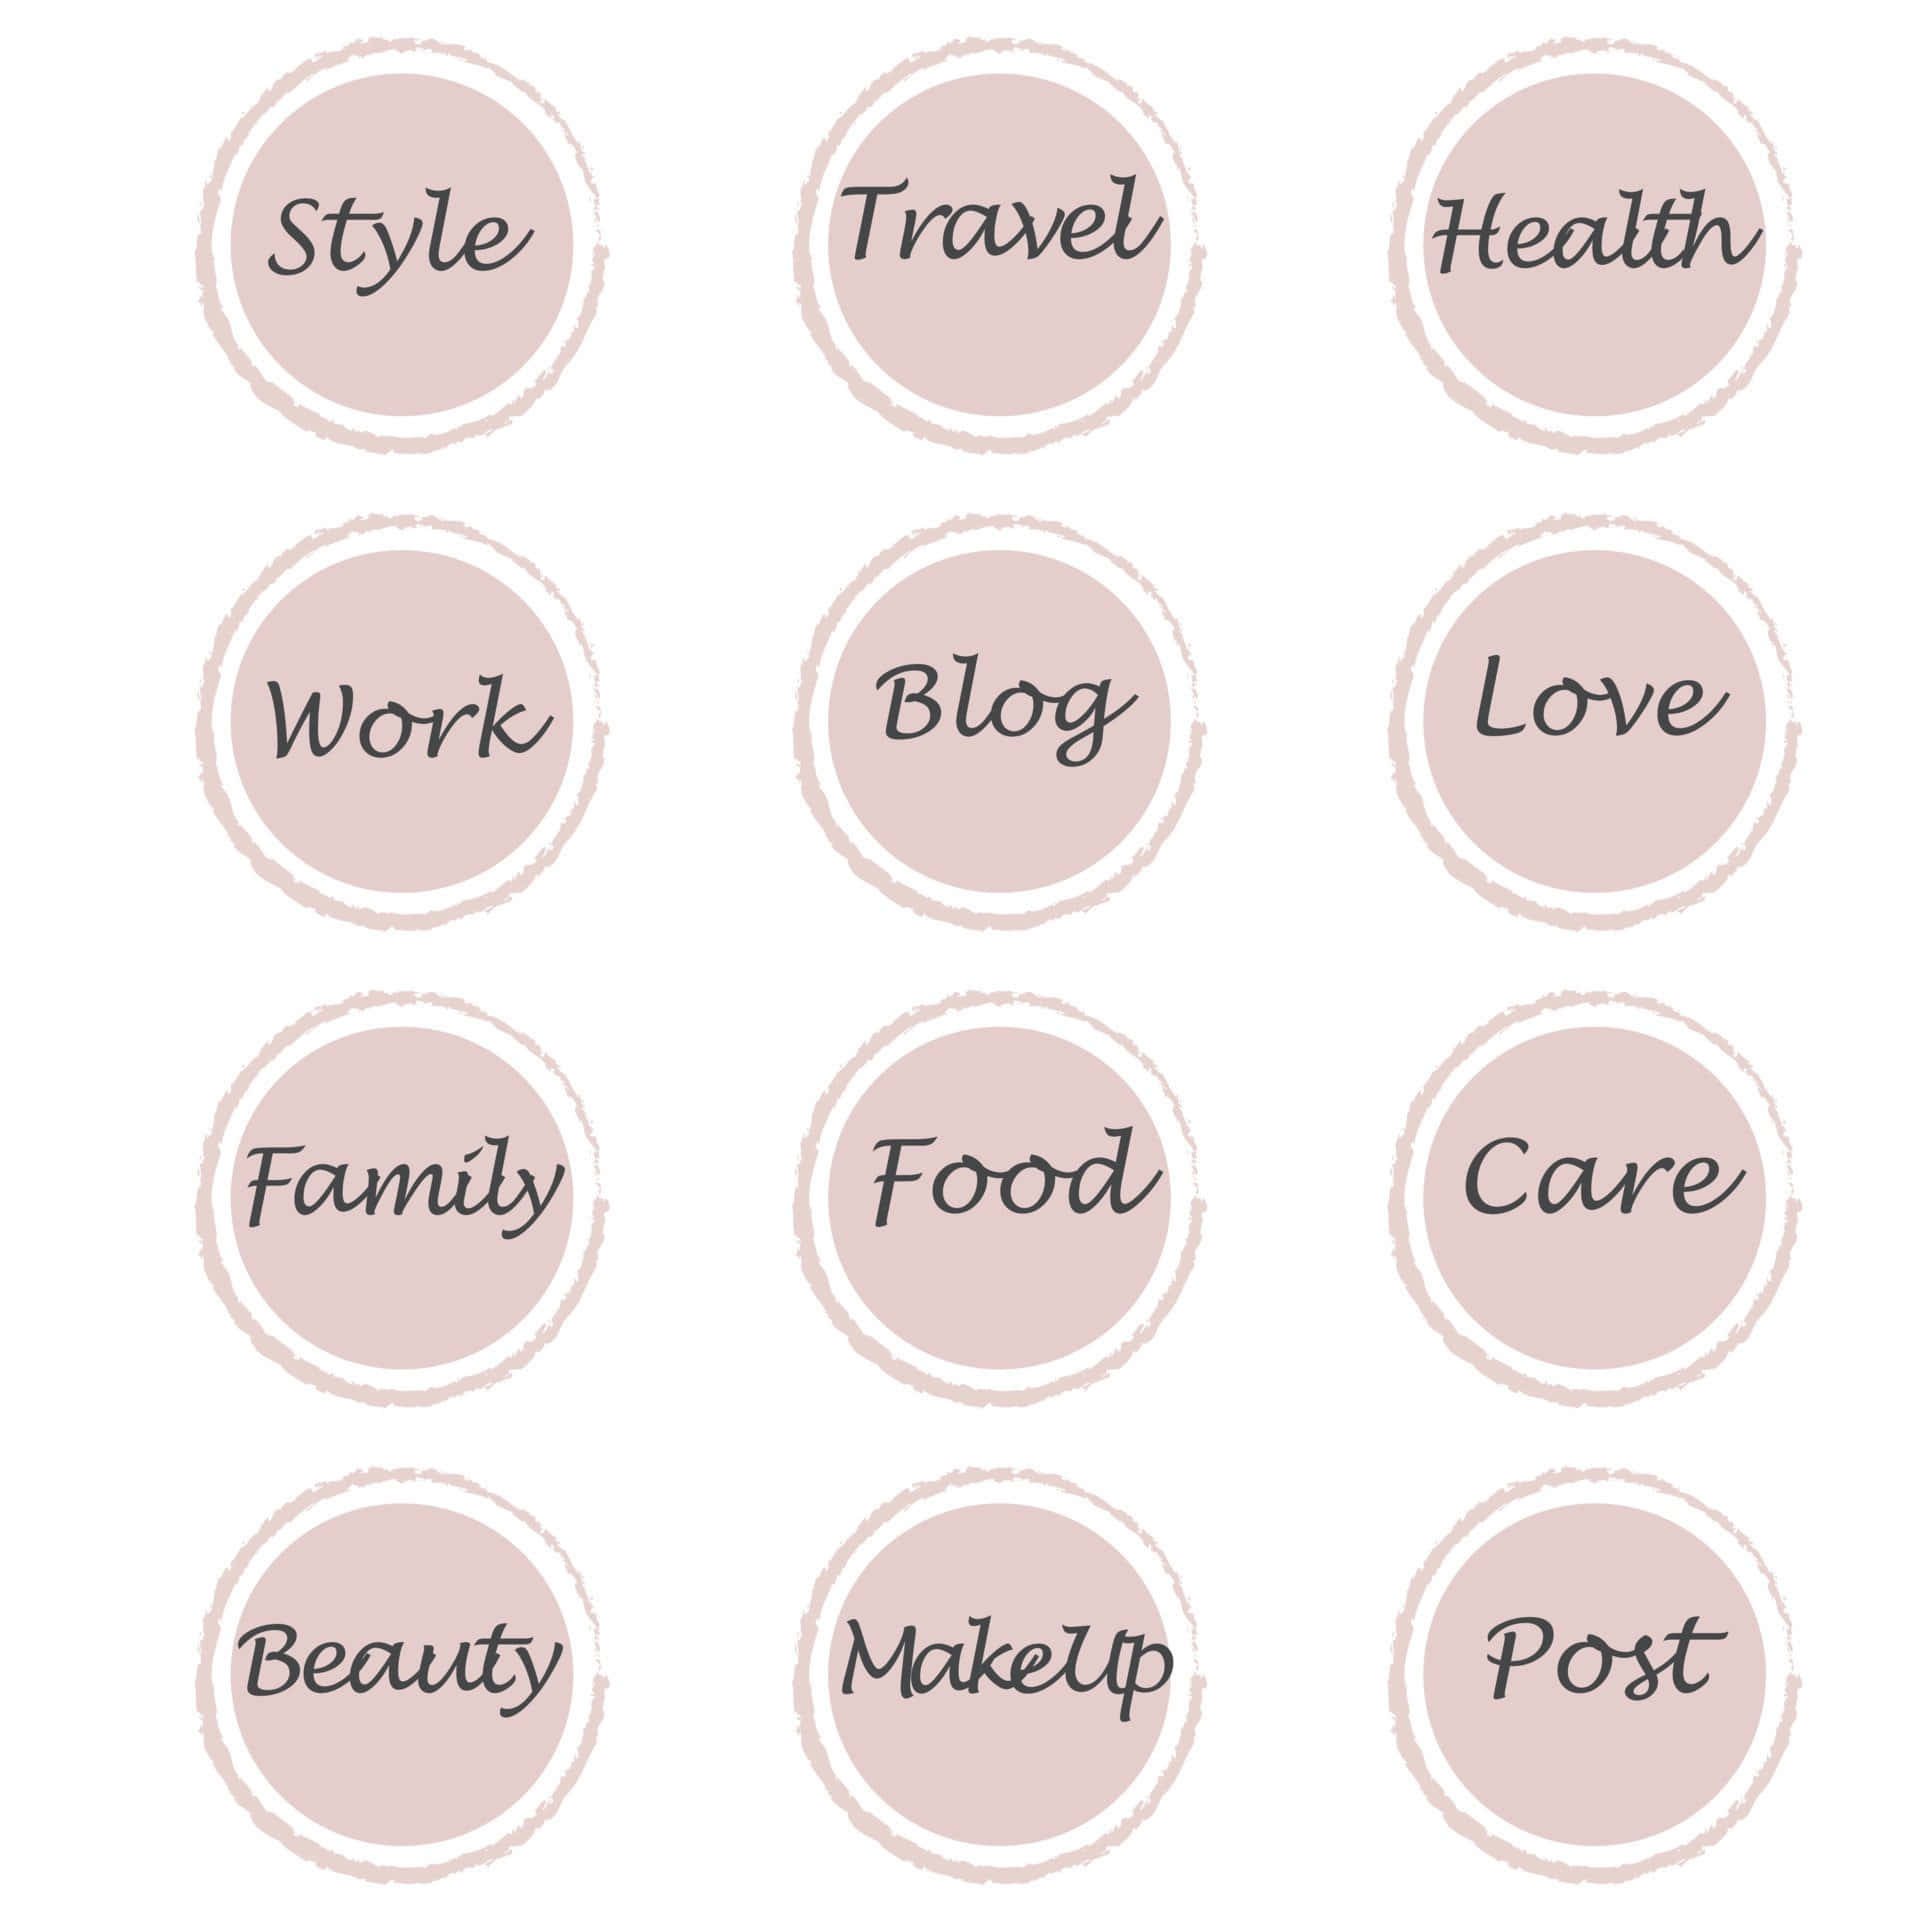 A Set Of Pink Circles With The Words Travel, Work, Food, And Beauty